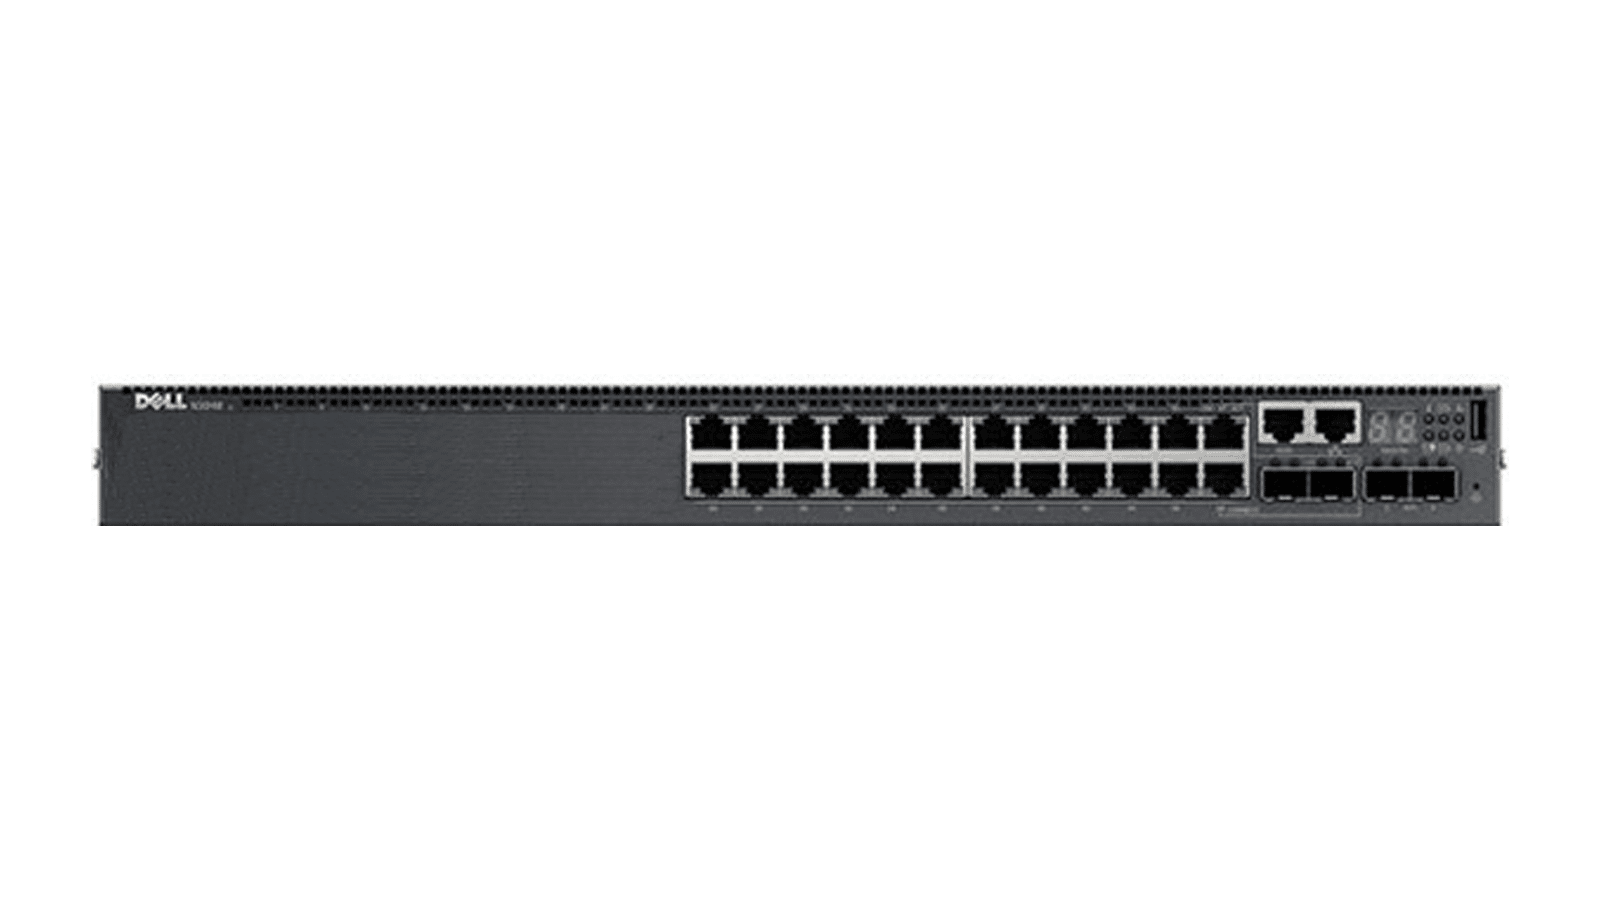 Dell N3024 Network Switch